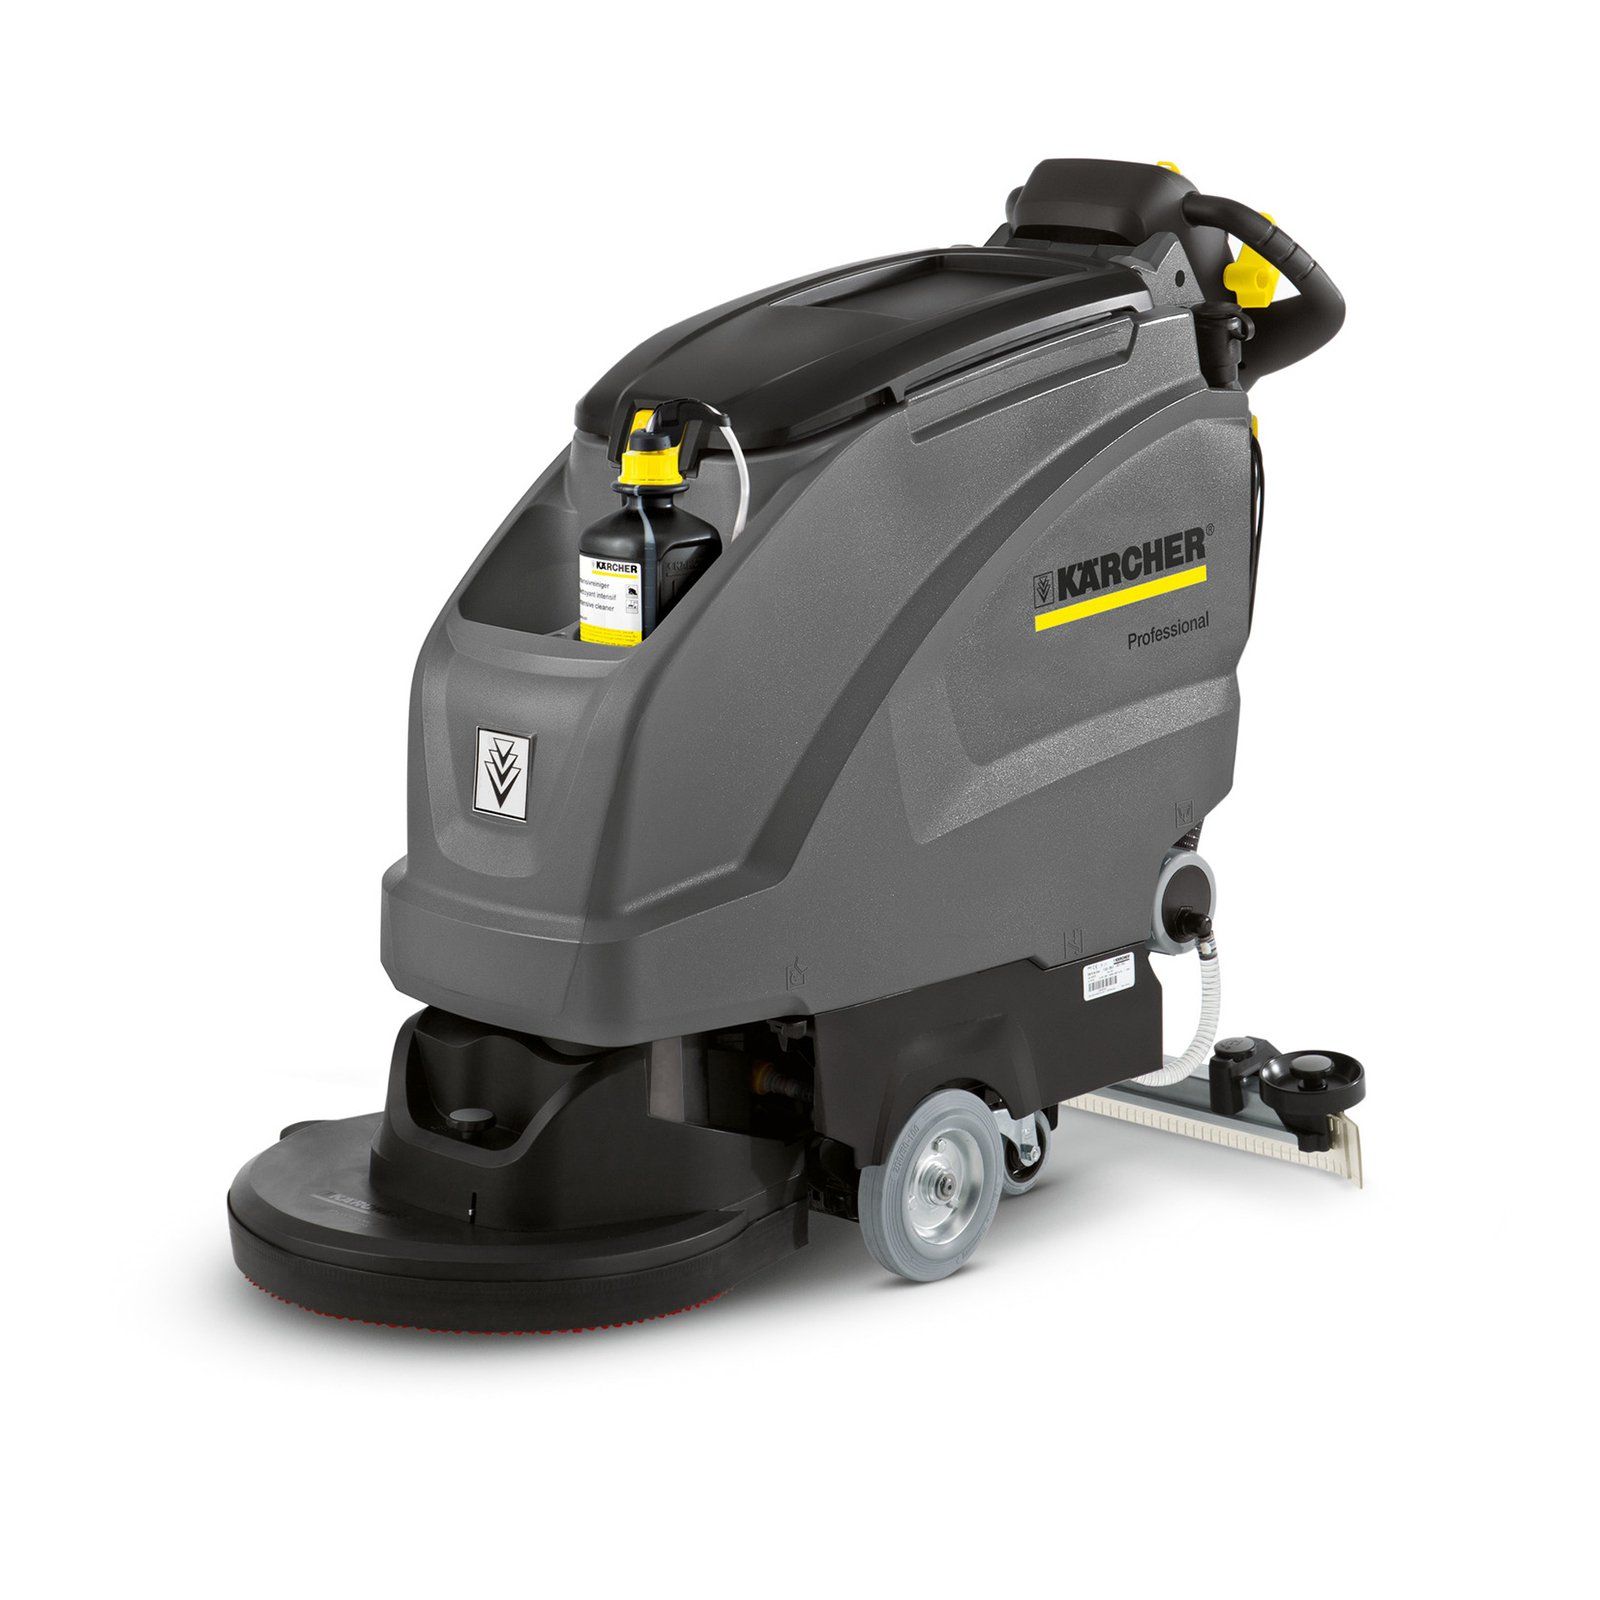 A karcher floor scrubber is sitting on a white surface.